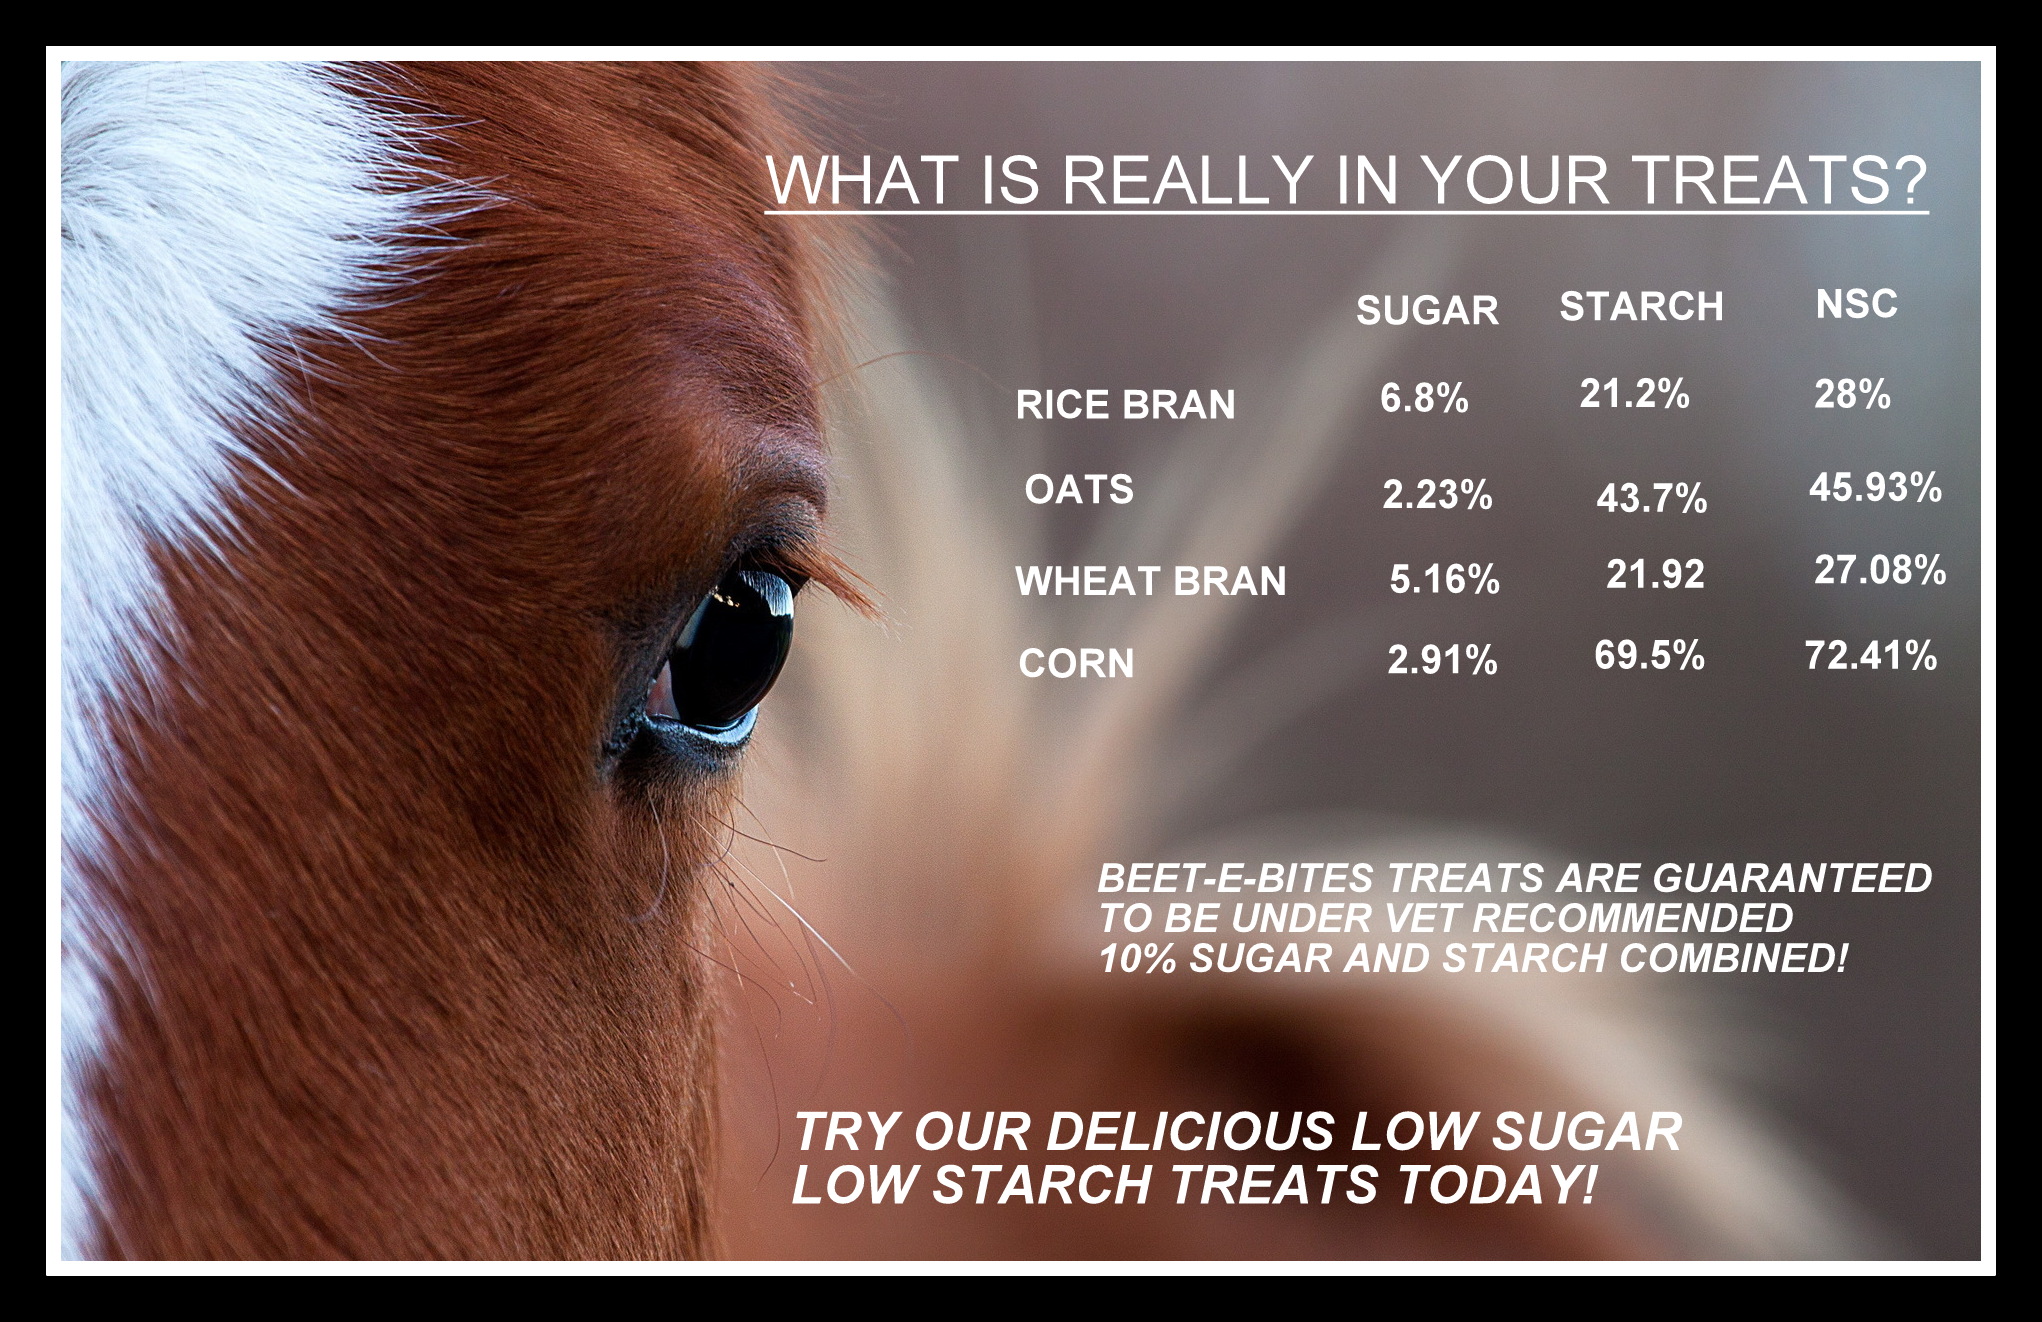 What is really in your treats?